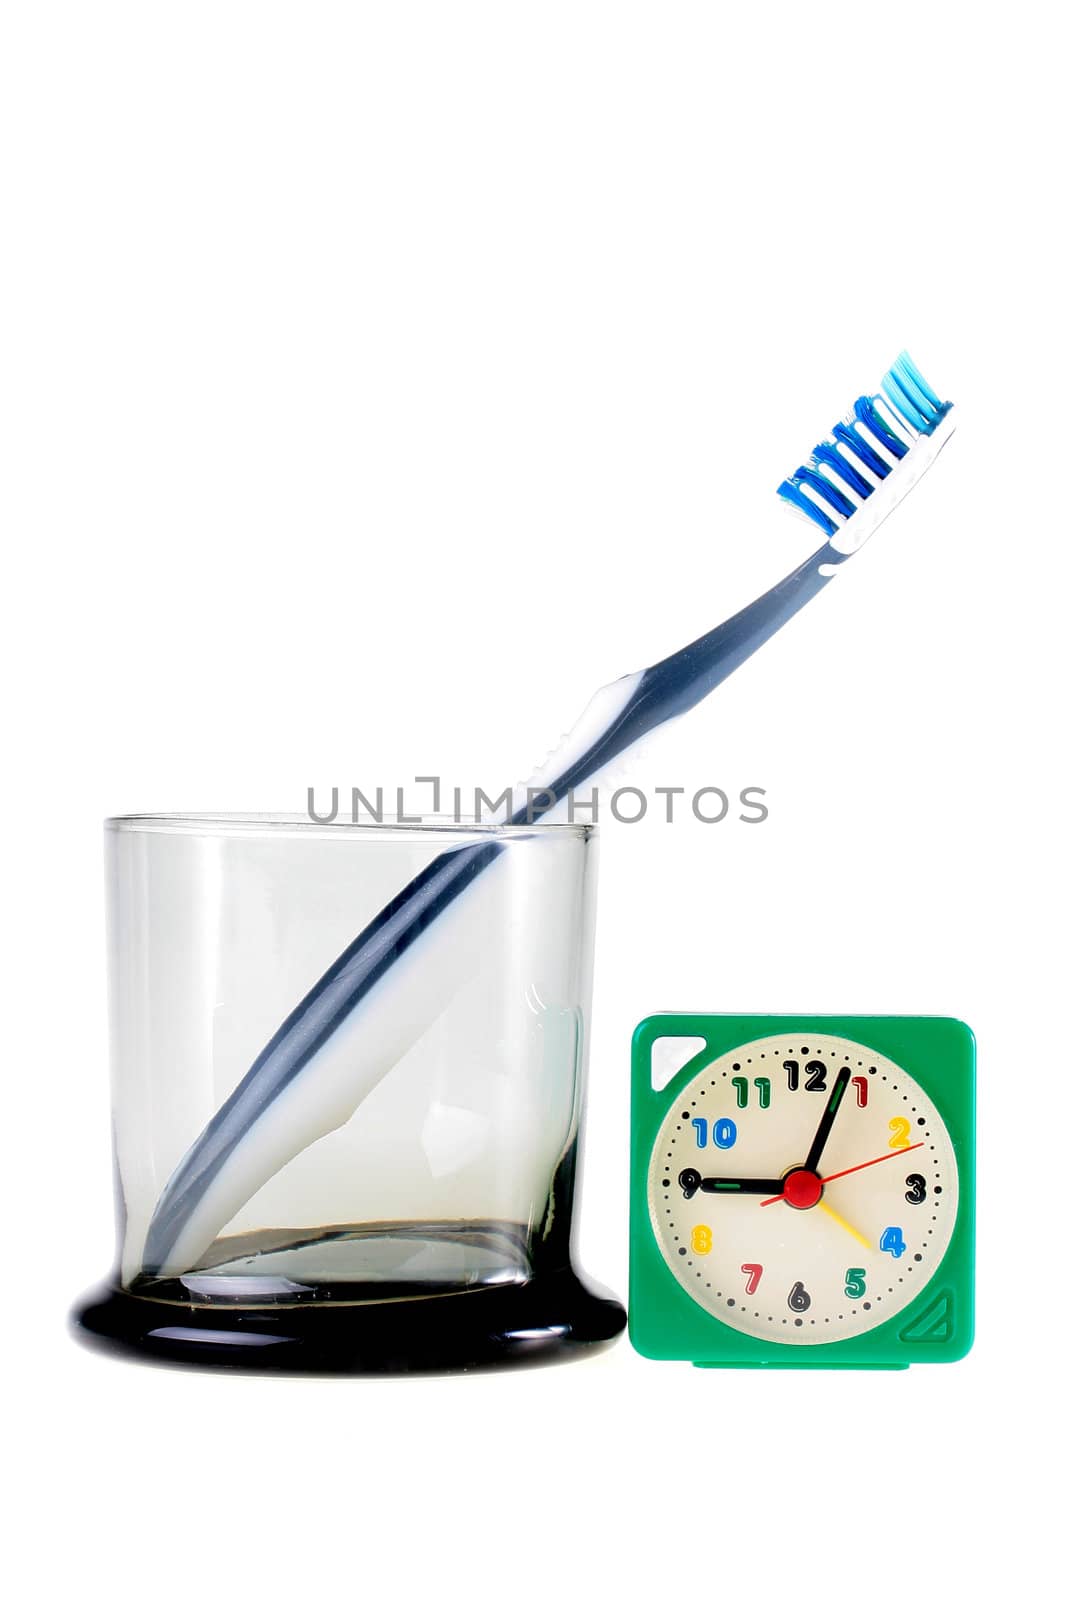 Tooth-brush in a glass glass and nearby an alarm clock, a background white.